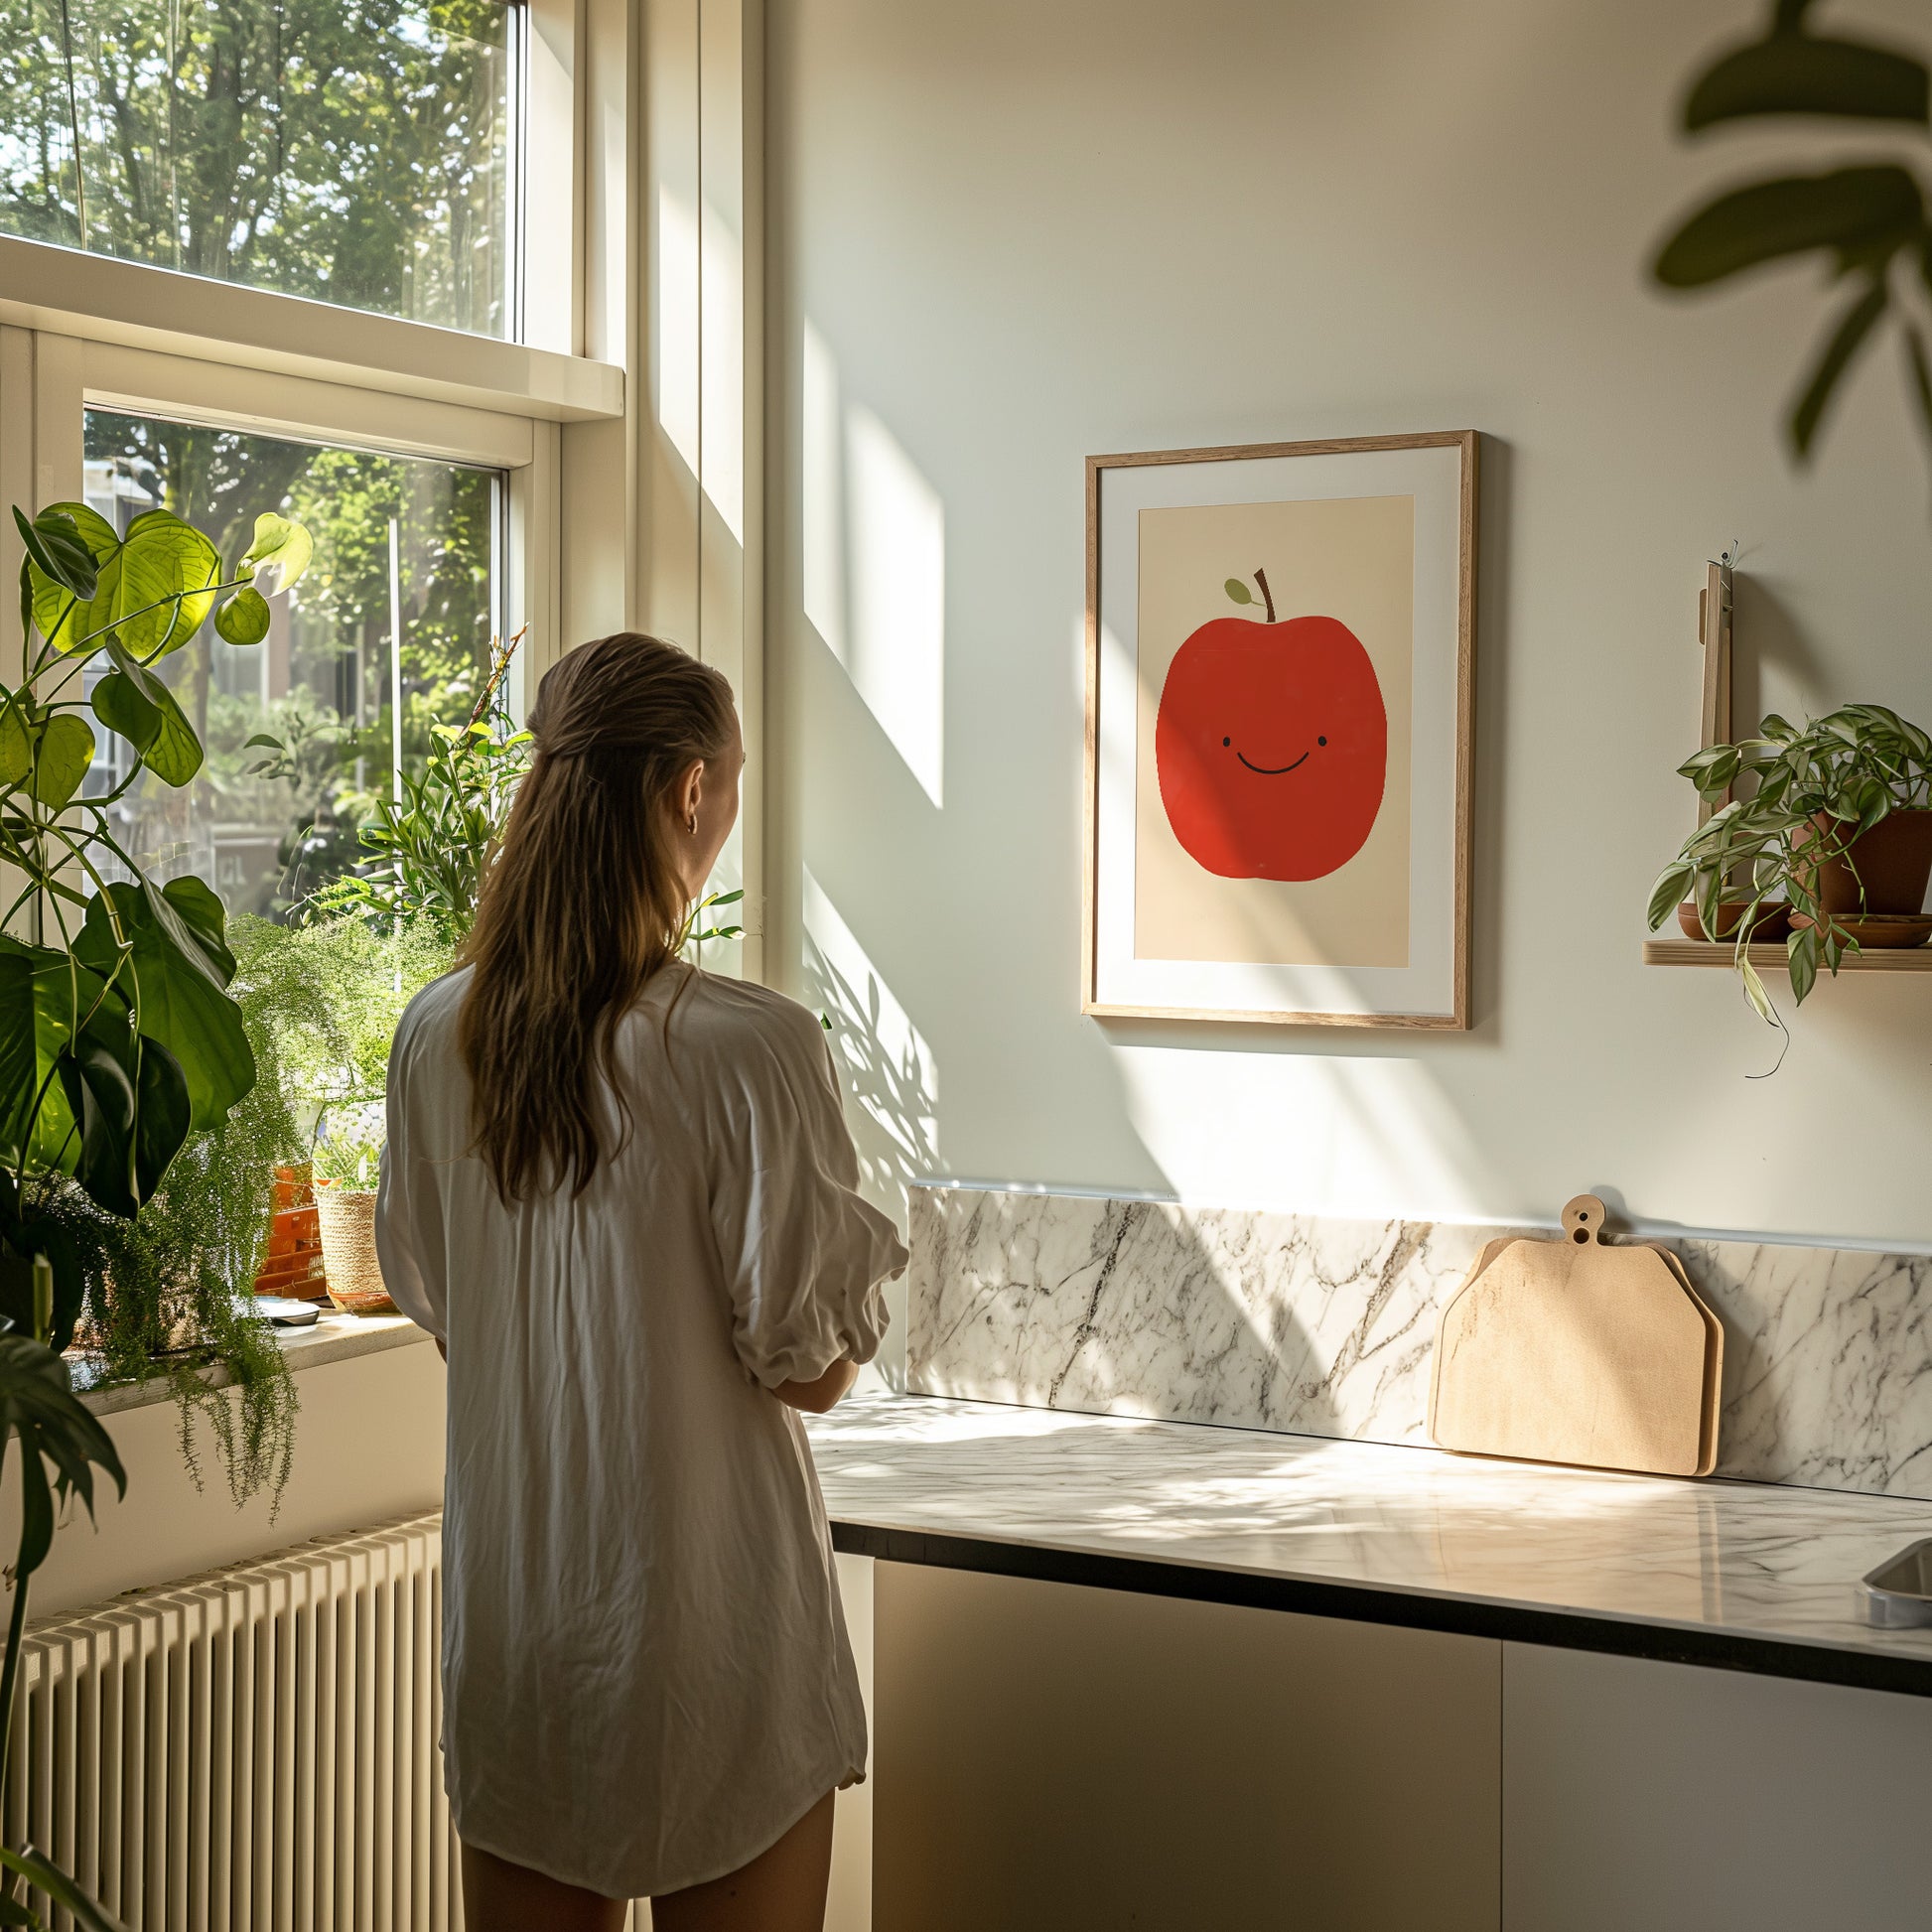 A person standing by a window looking at a framed apple picture in a sunny room.